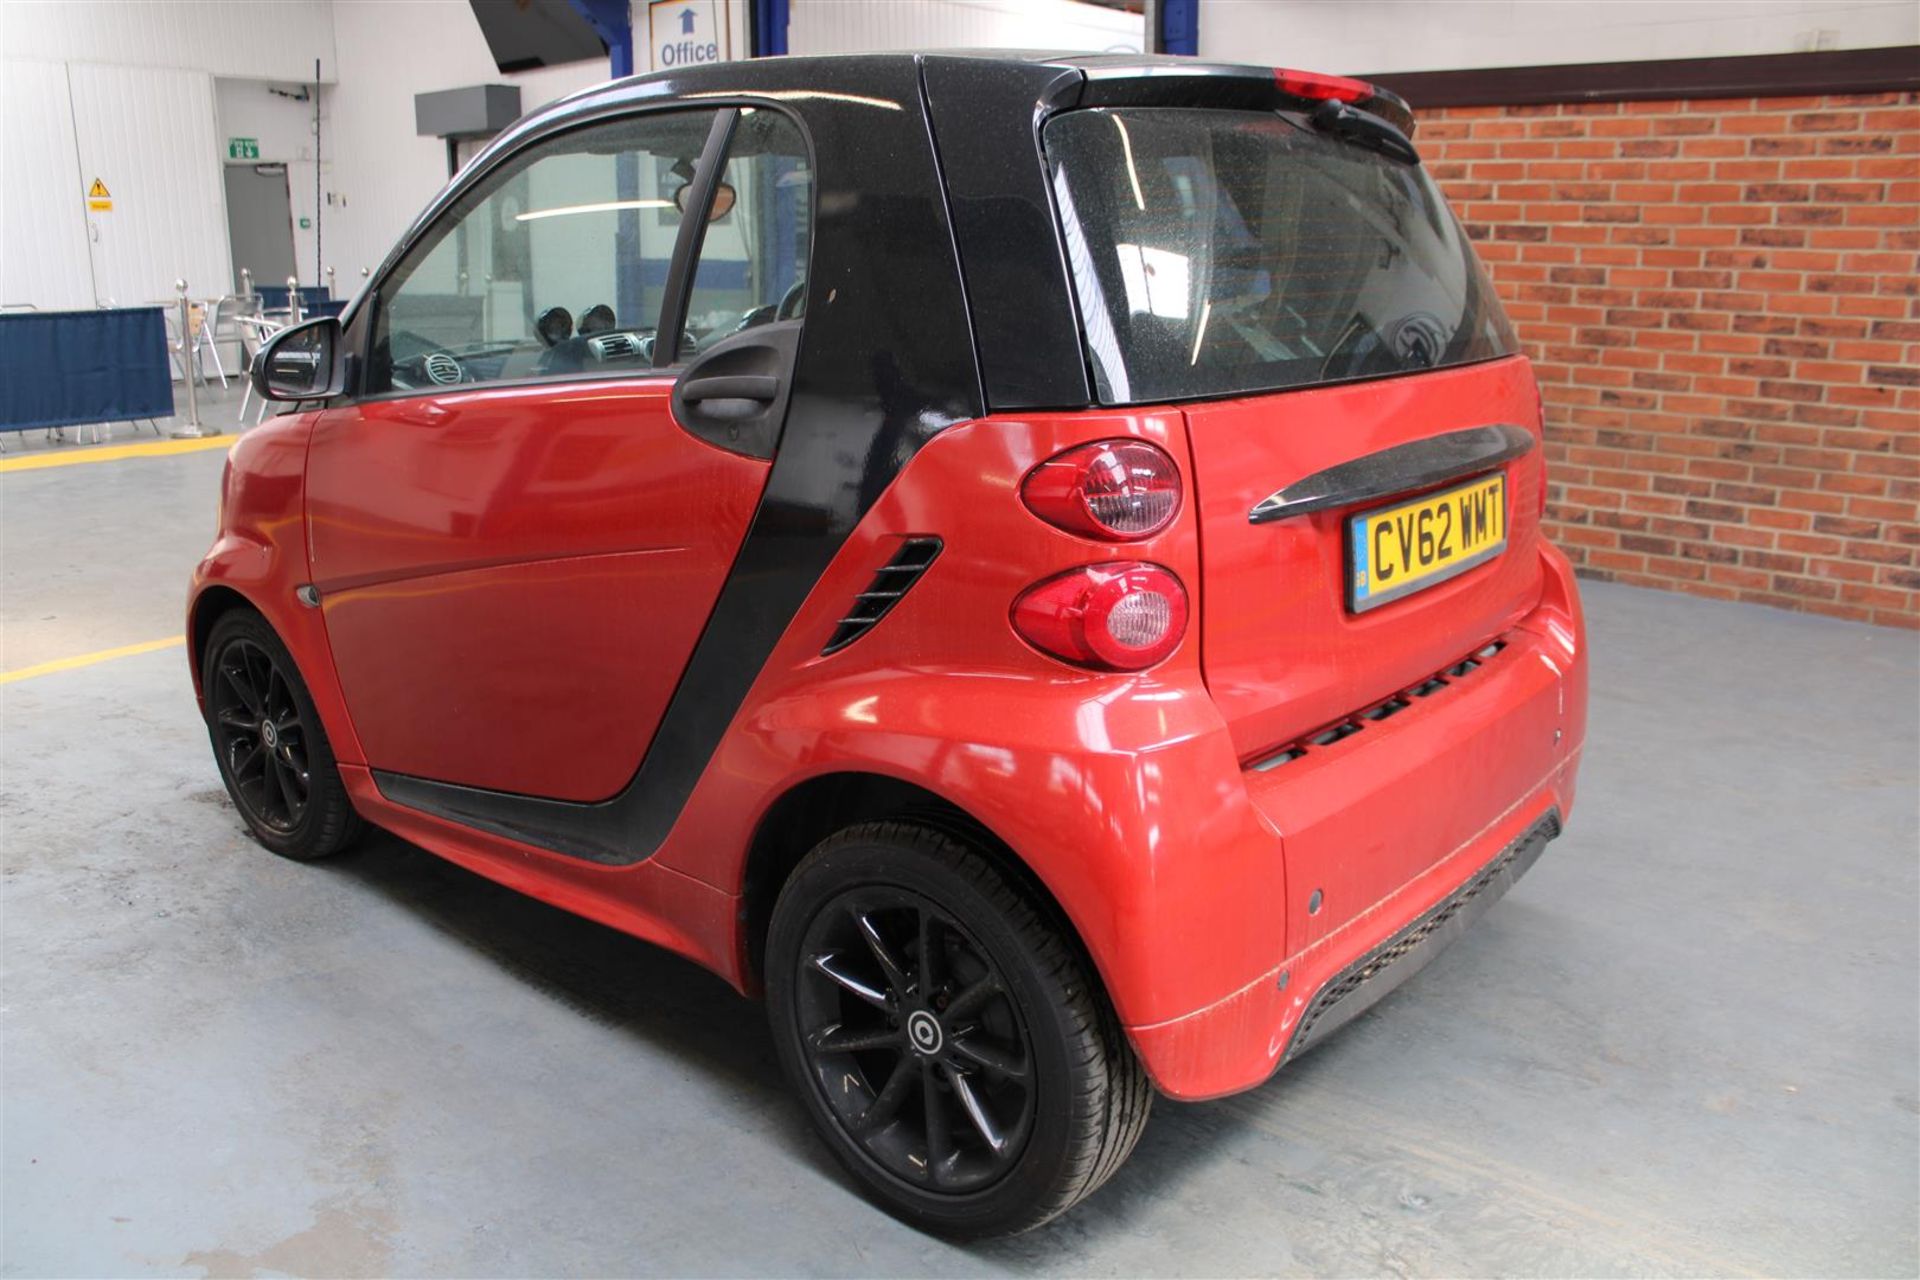 62 12 Smart Fortwo Passion MHD - Image 26 of 27